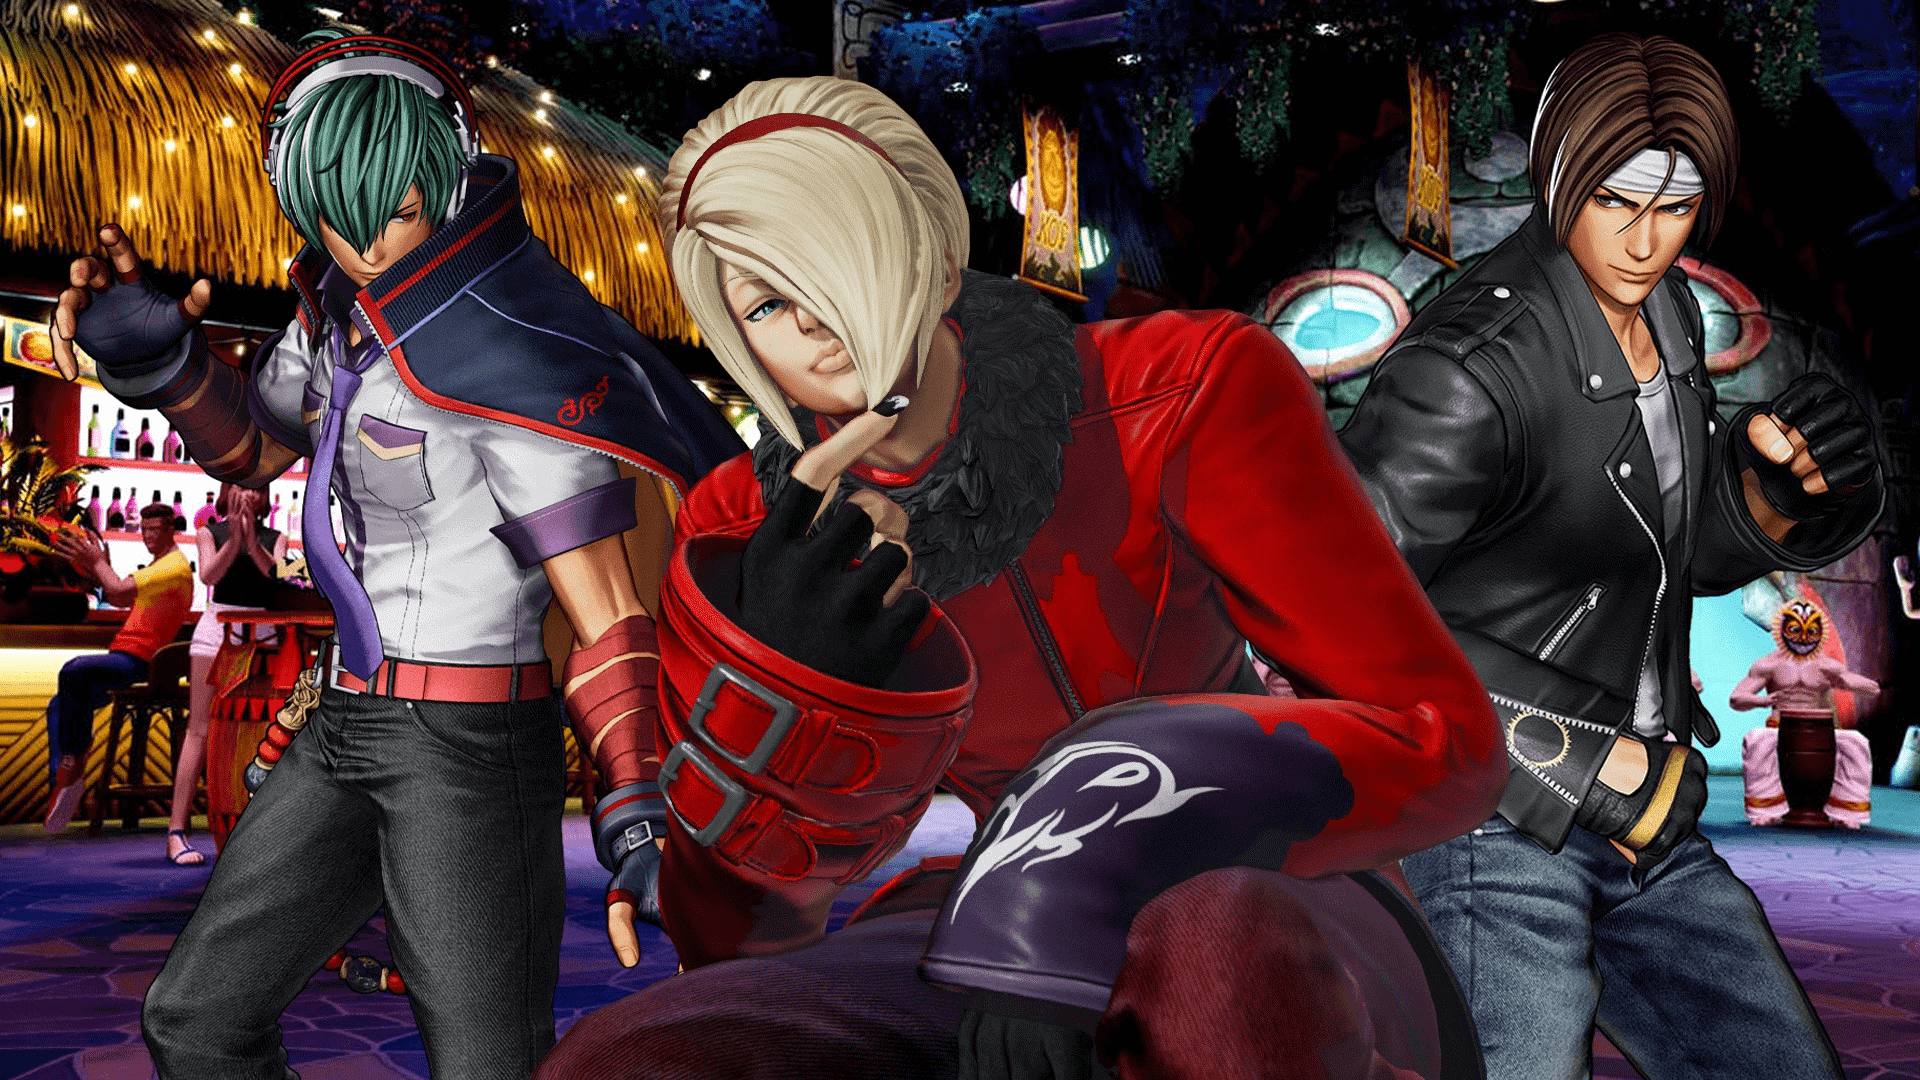 The Faces of Battle: Protagonists in the King of Fighters Franchise